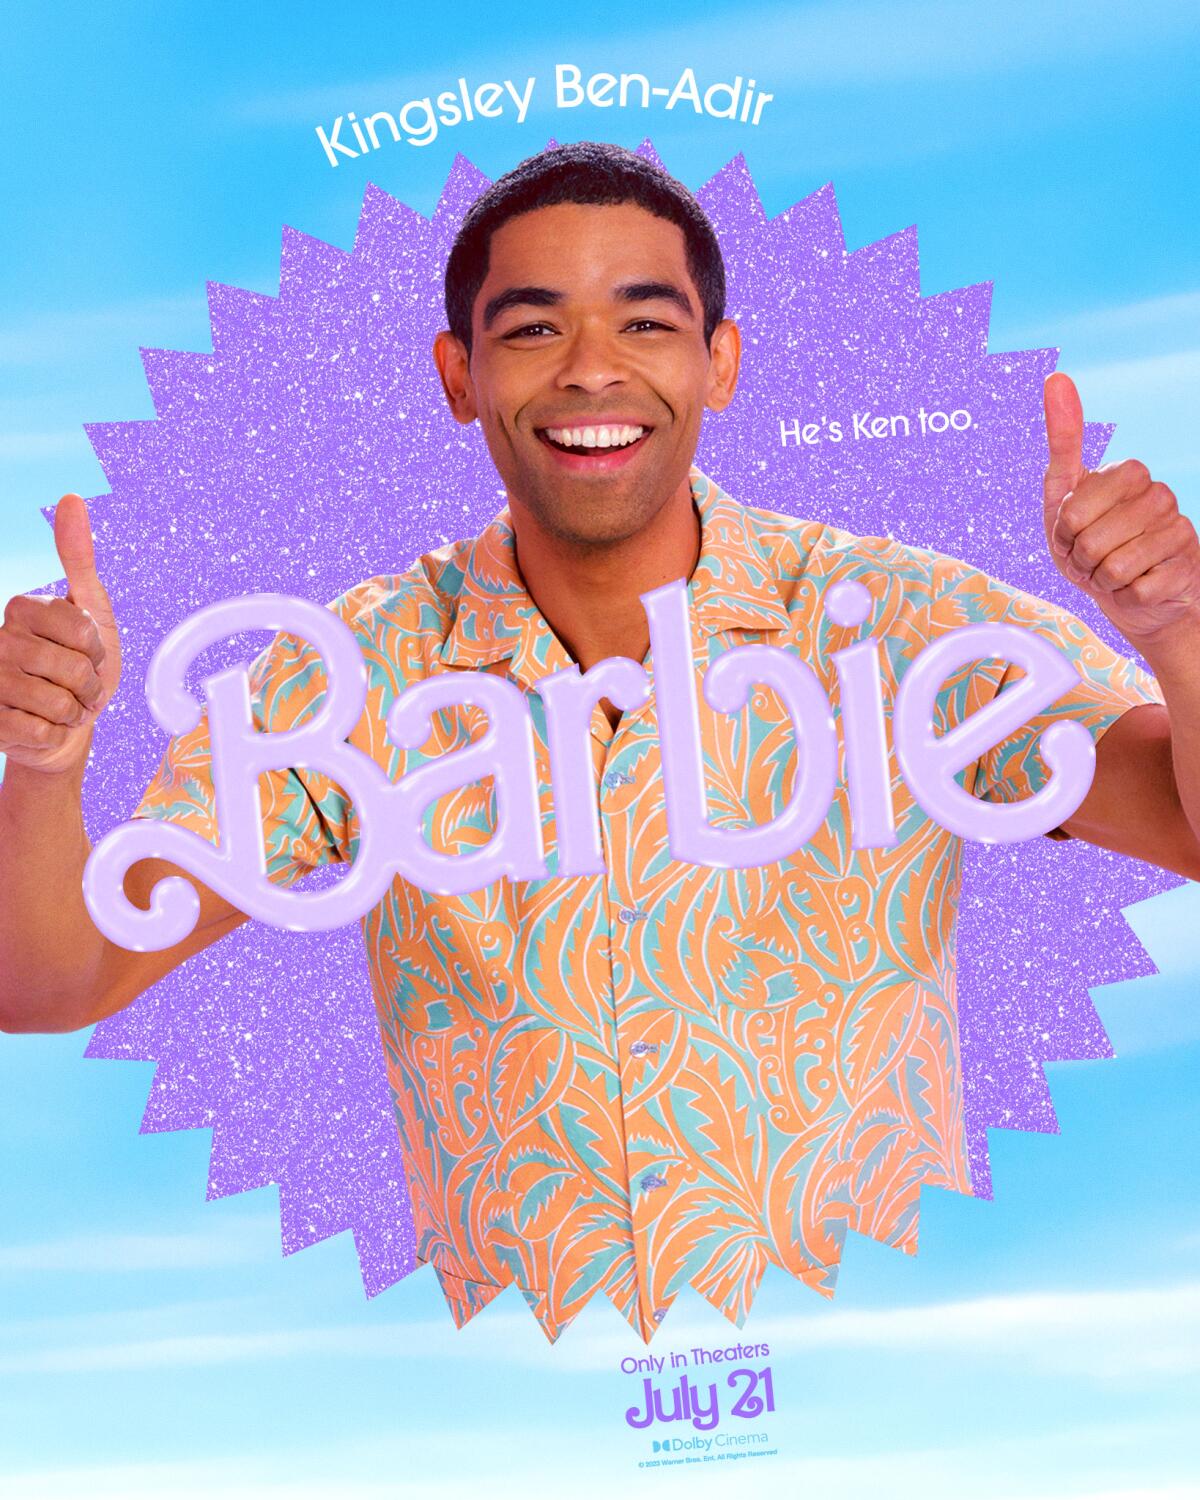 Kingsley Ben-Adir smiles and gives two thumbs up in a "Barbie" movie poster. He wears an orange patterned shirt.